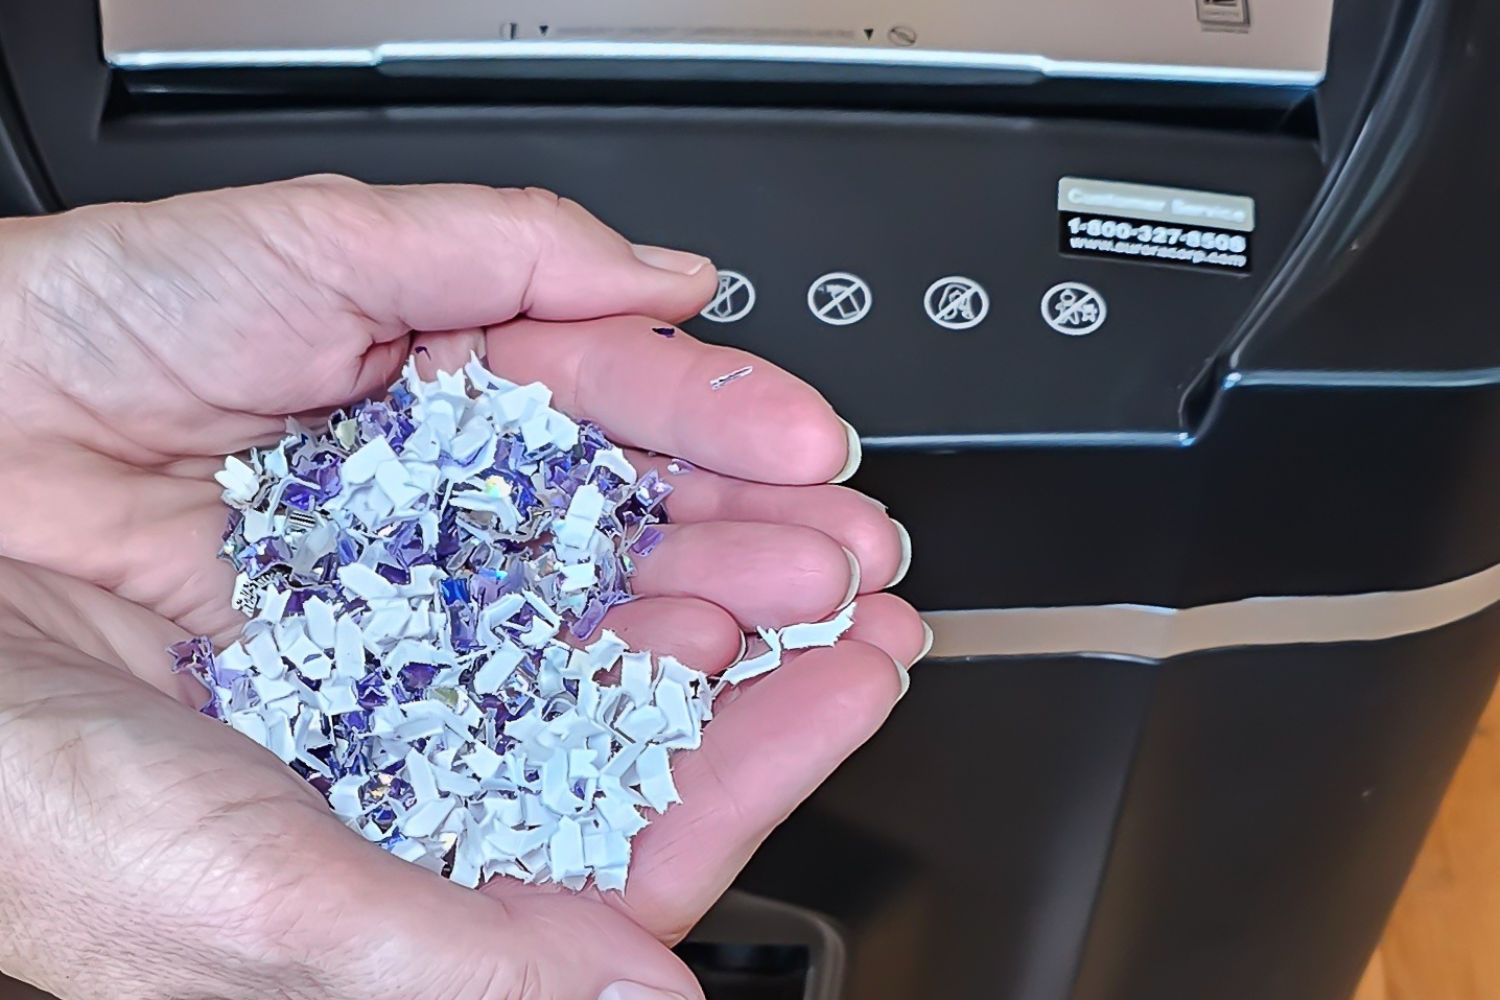 Cupped hands holding micr-cut paper waste just over the feed of the Aurora paper shredder